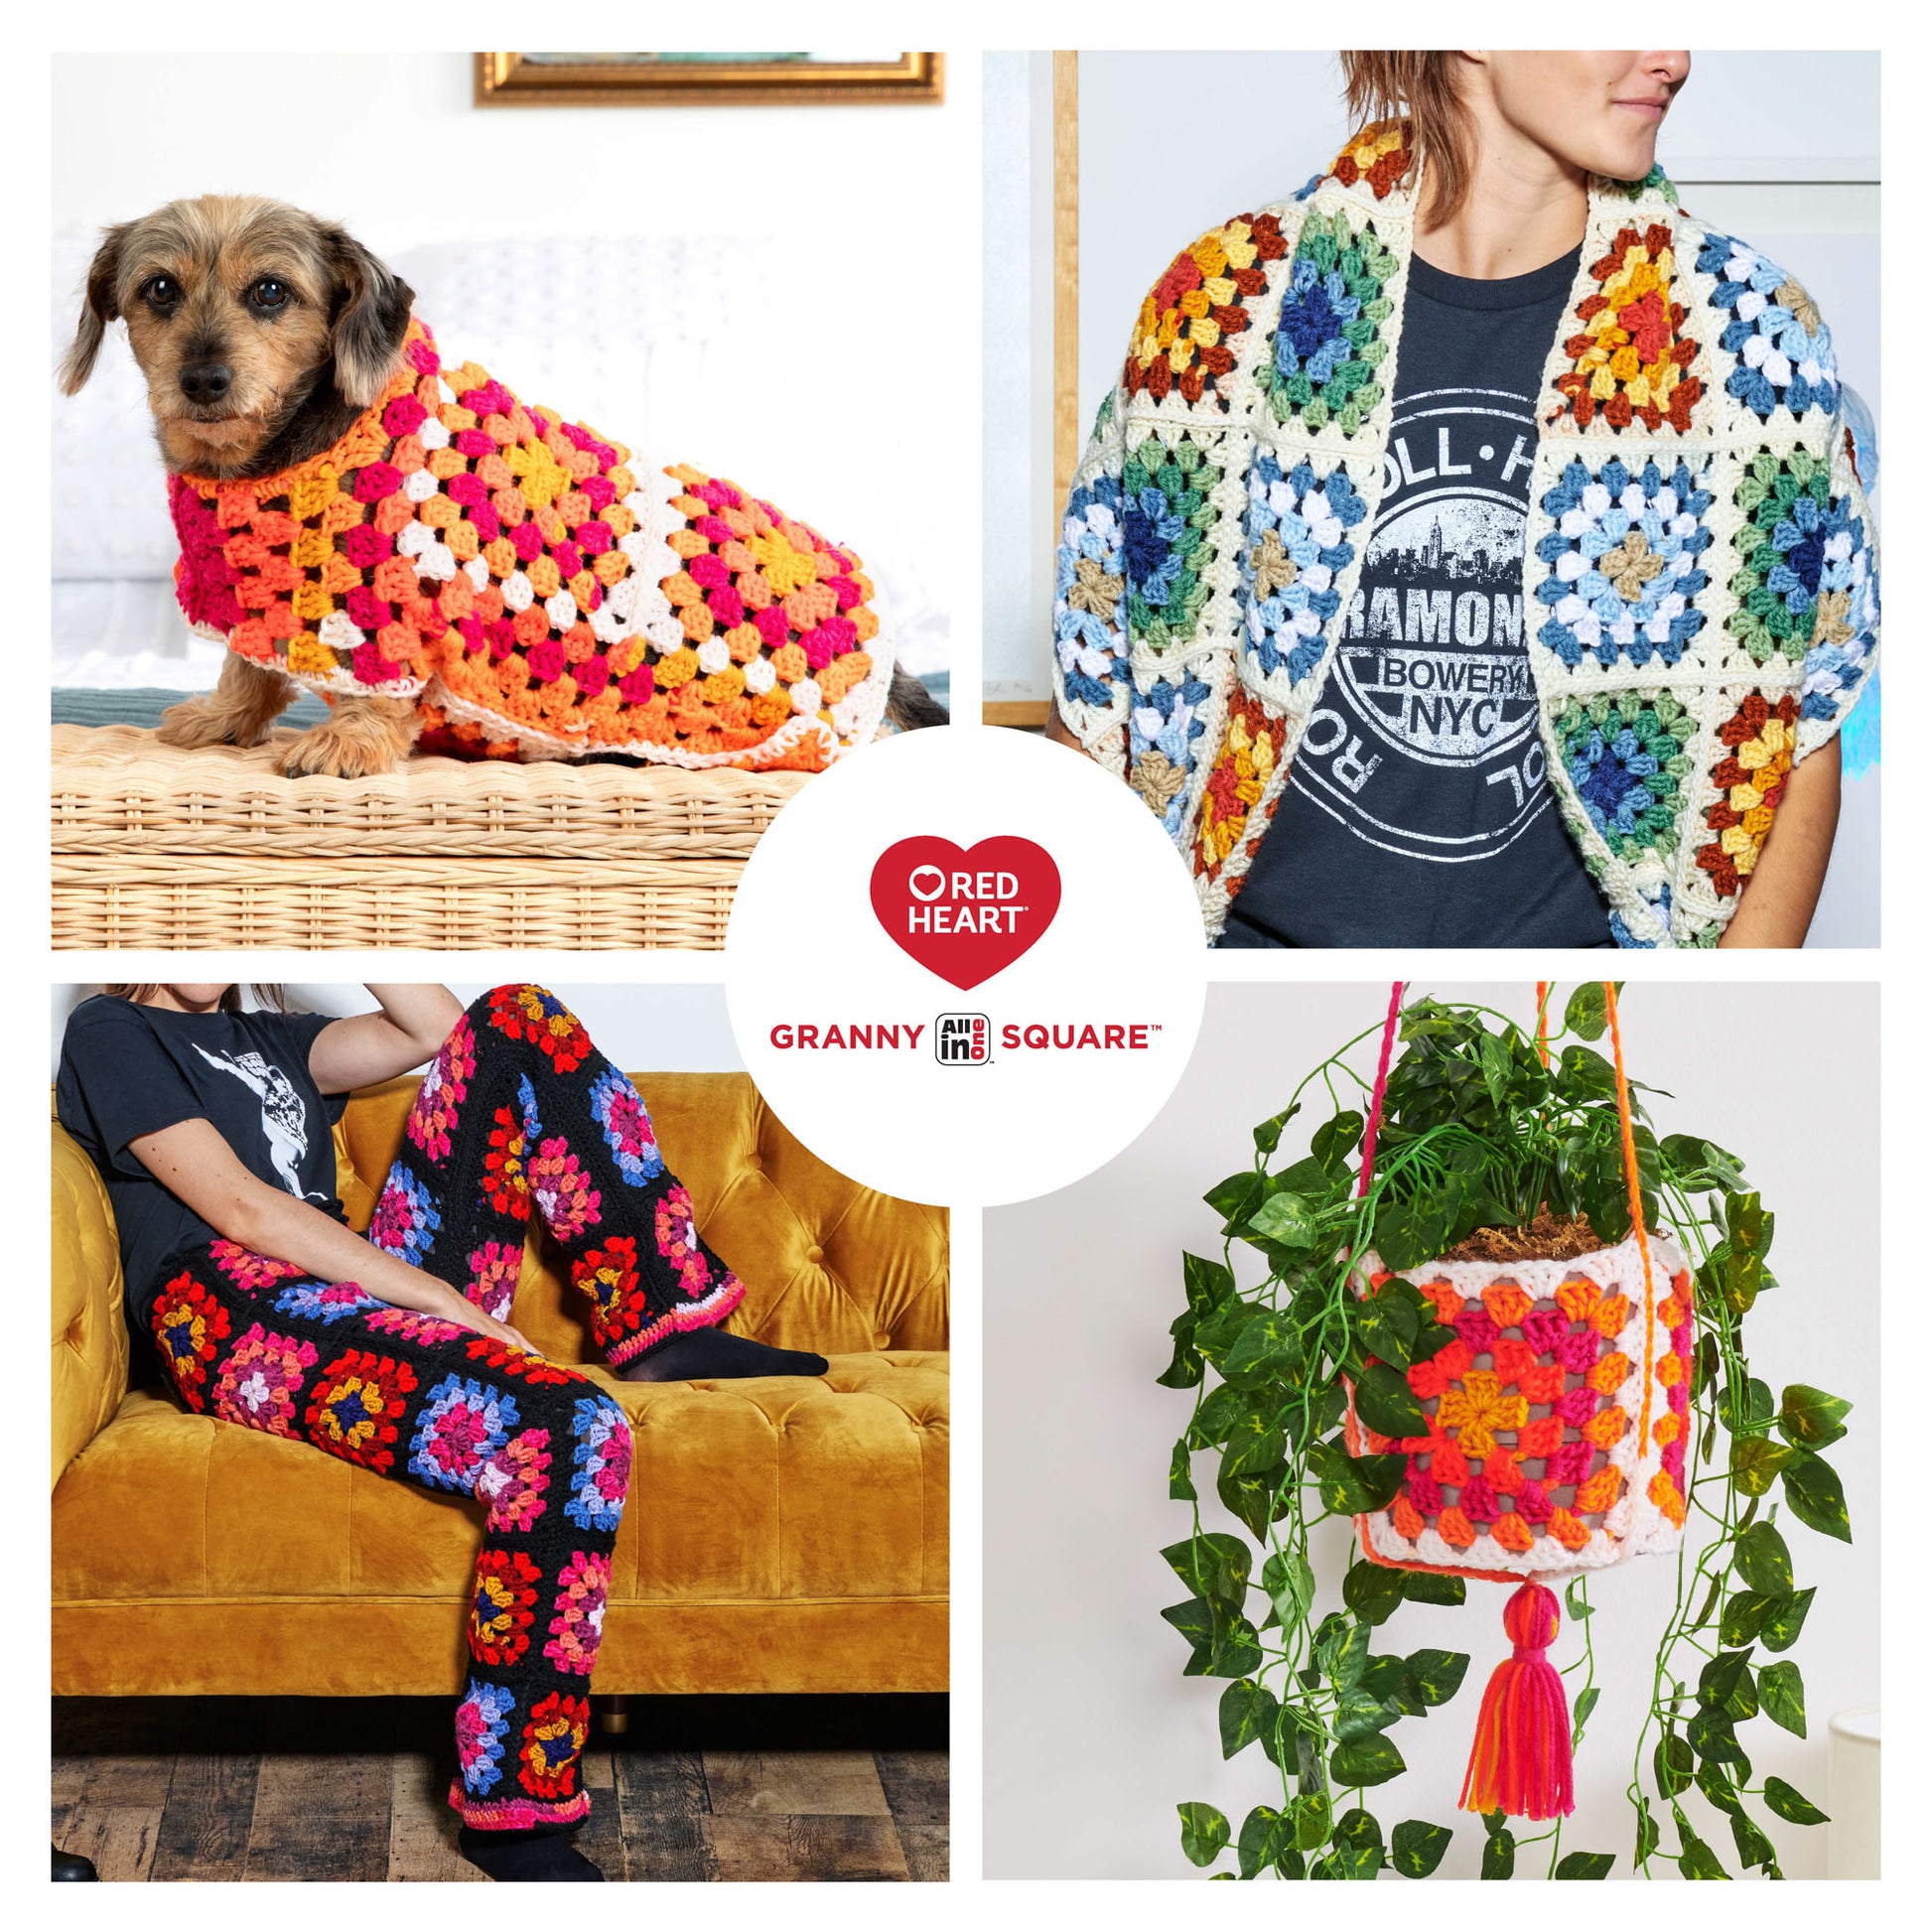 RED HEART ALL IN ONE GRANNY SQUARE YARN｜TikTok Search